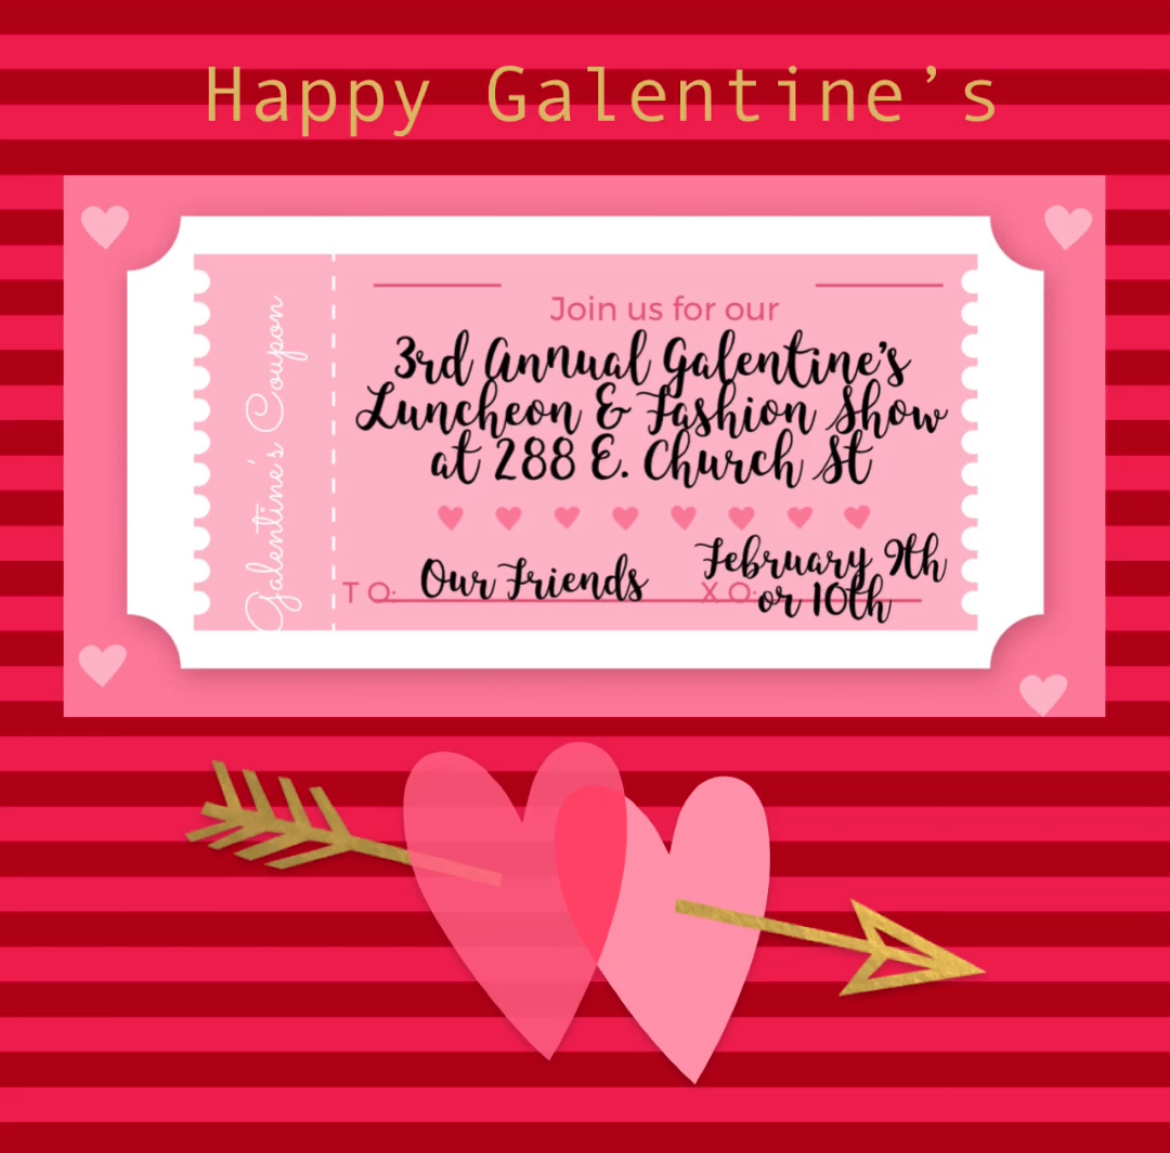 striped red background with a pink ticket and two shades of pink hearts